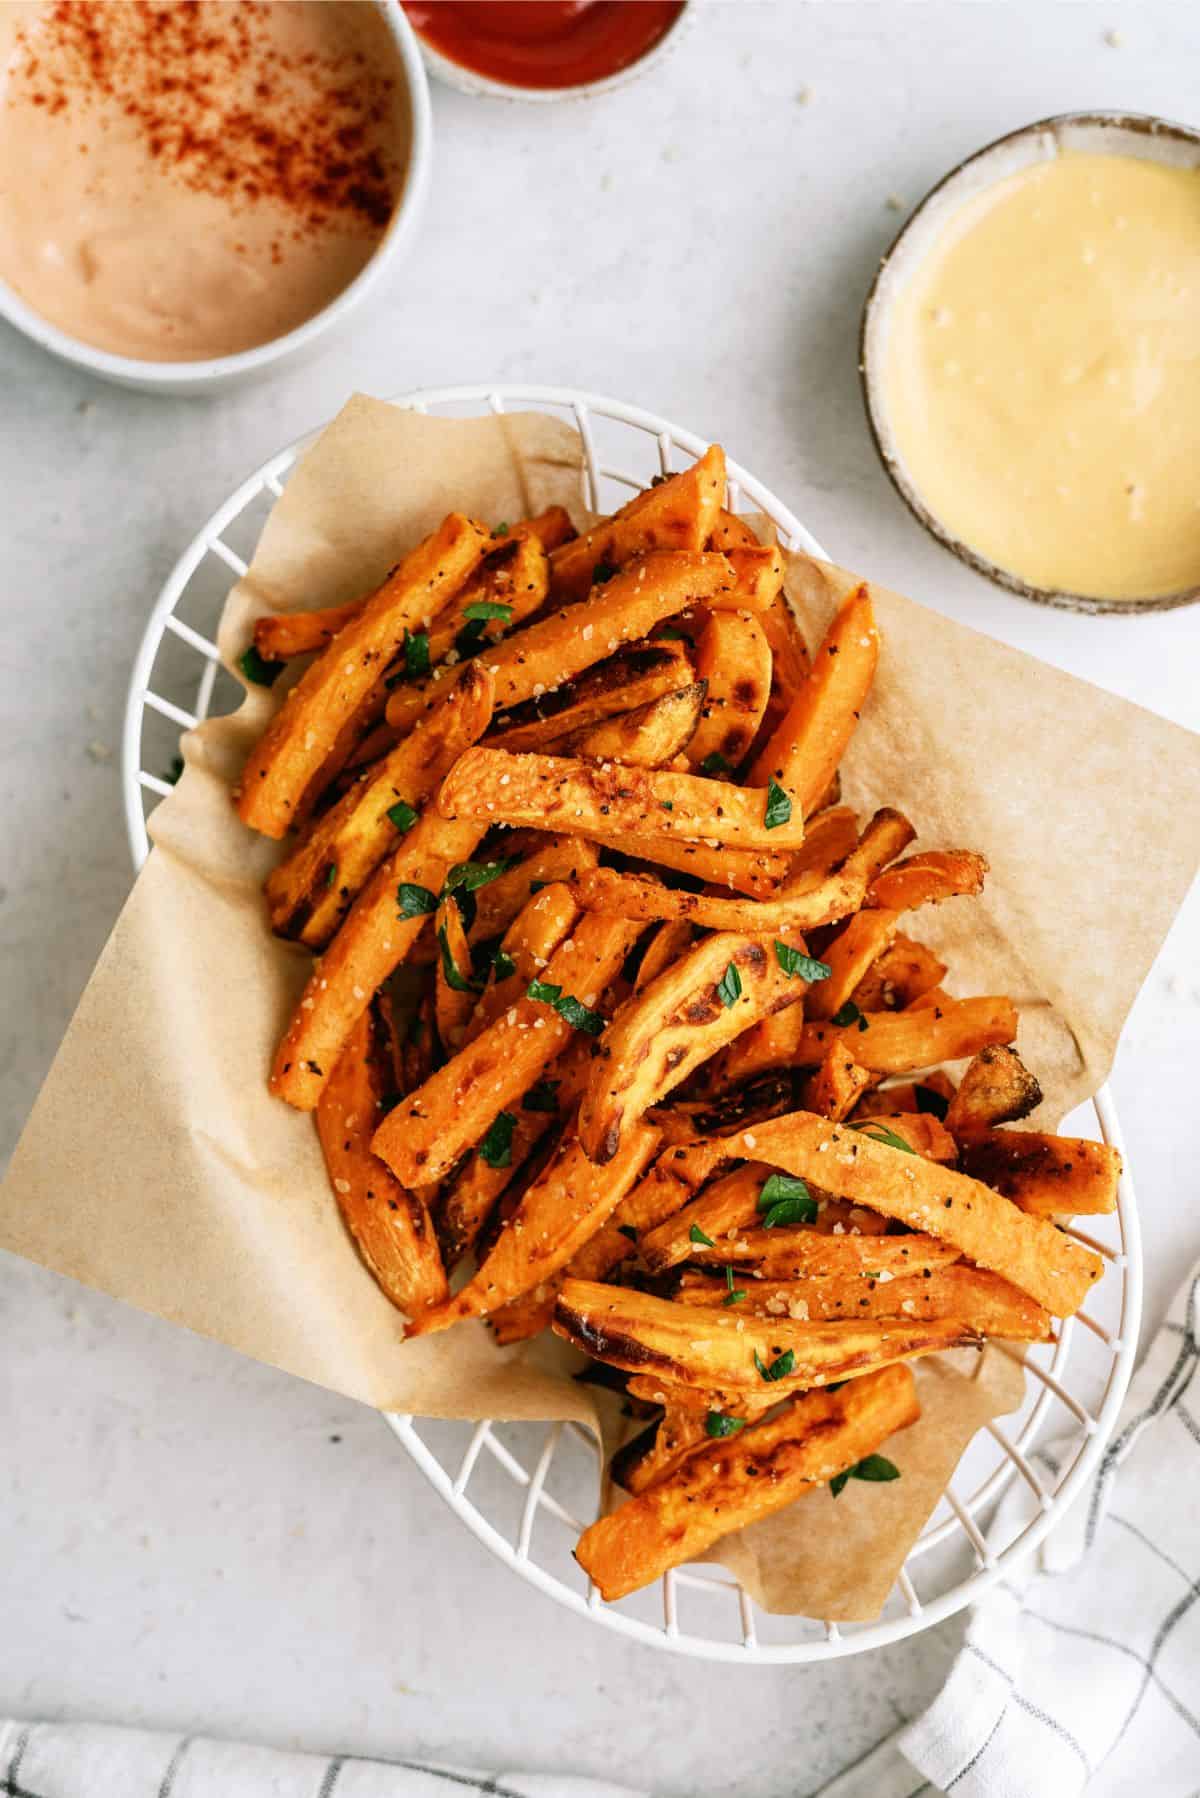 We Tried 45 Bags Of Frozen French Fries—These Are The Absolute Best